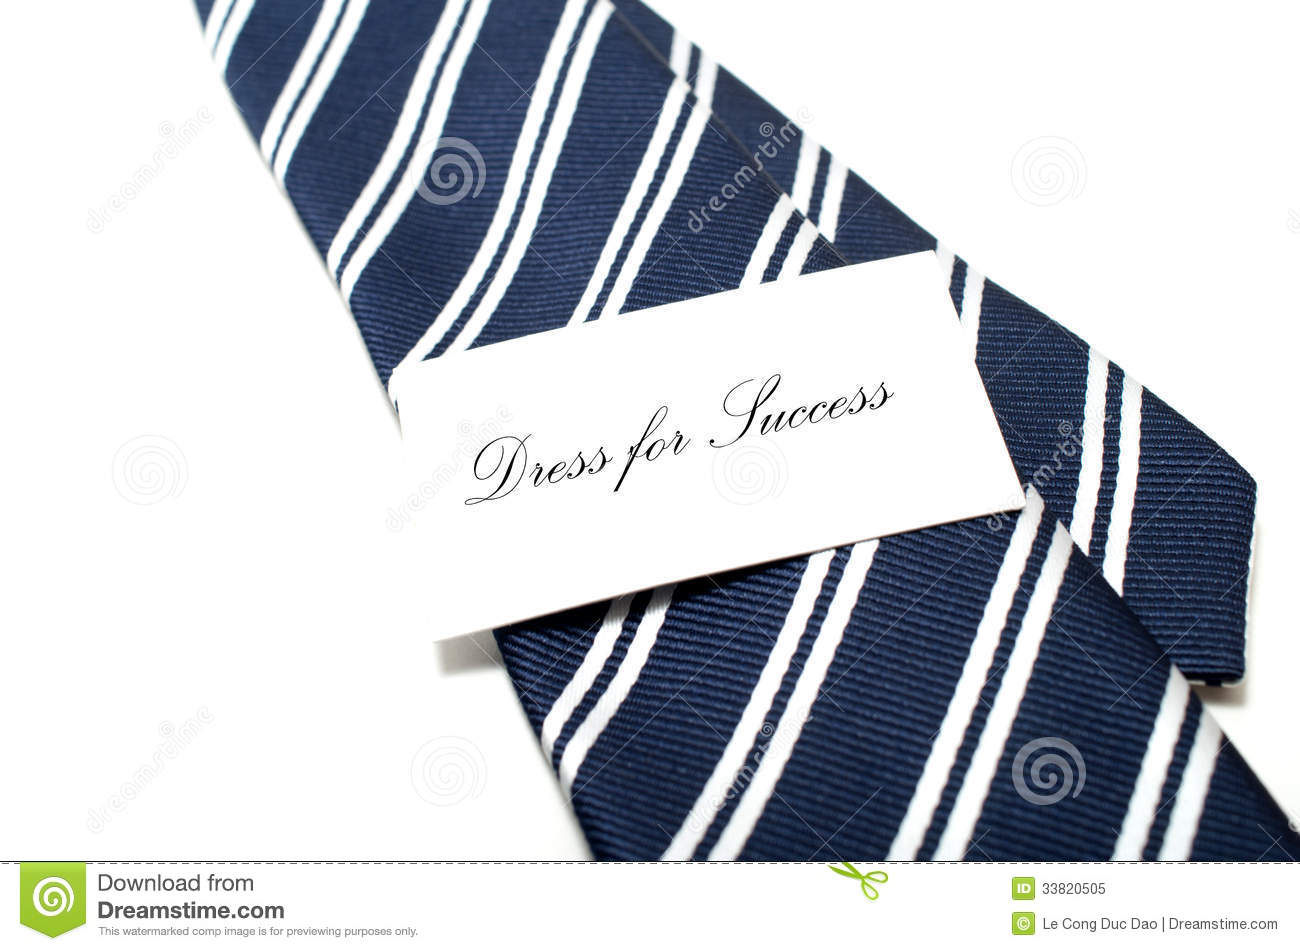 Dress For Success Tag On Blue Tie Royalty Free Stock Photo   Image    